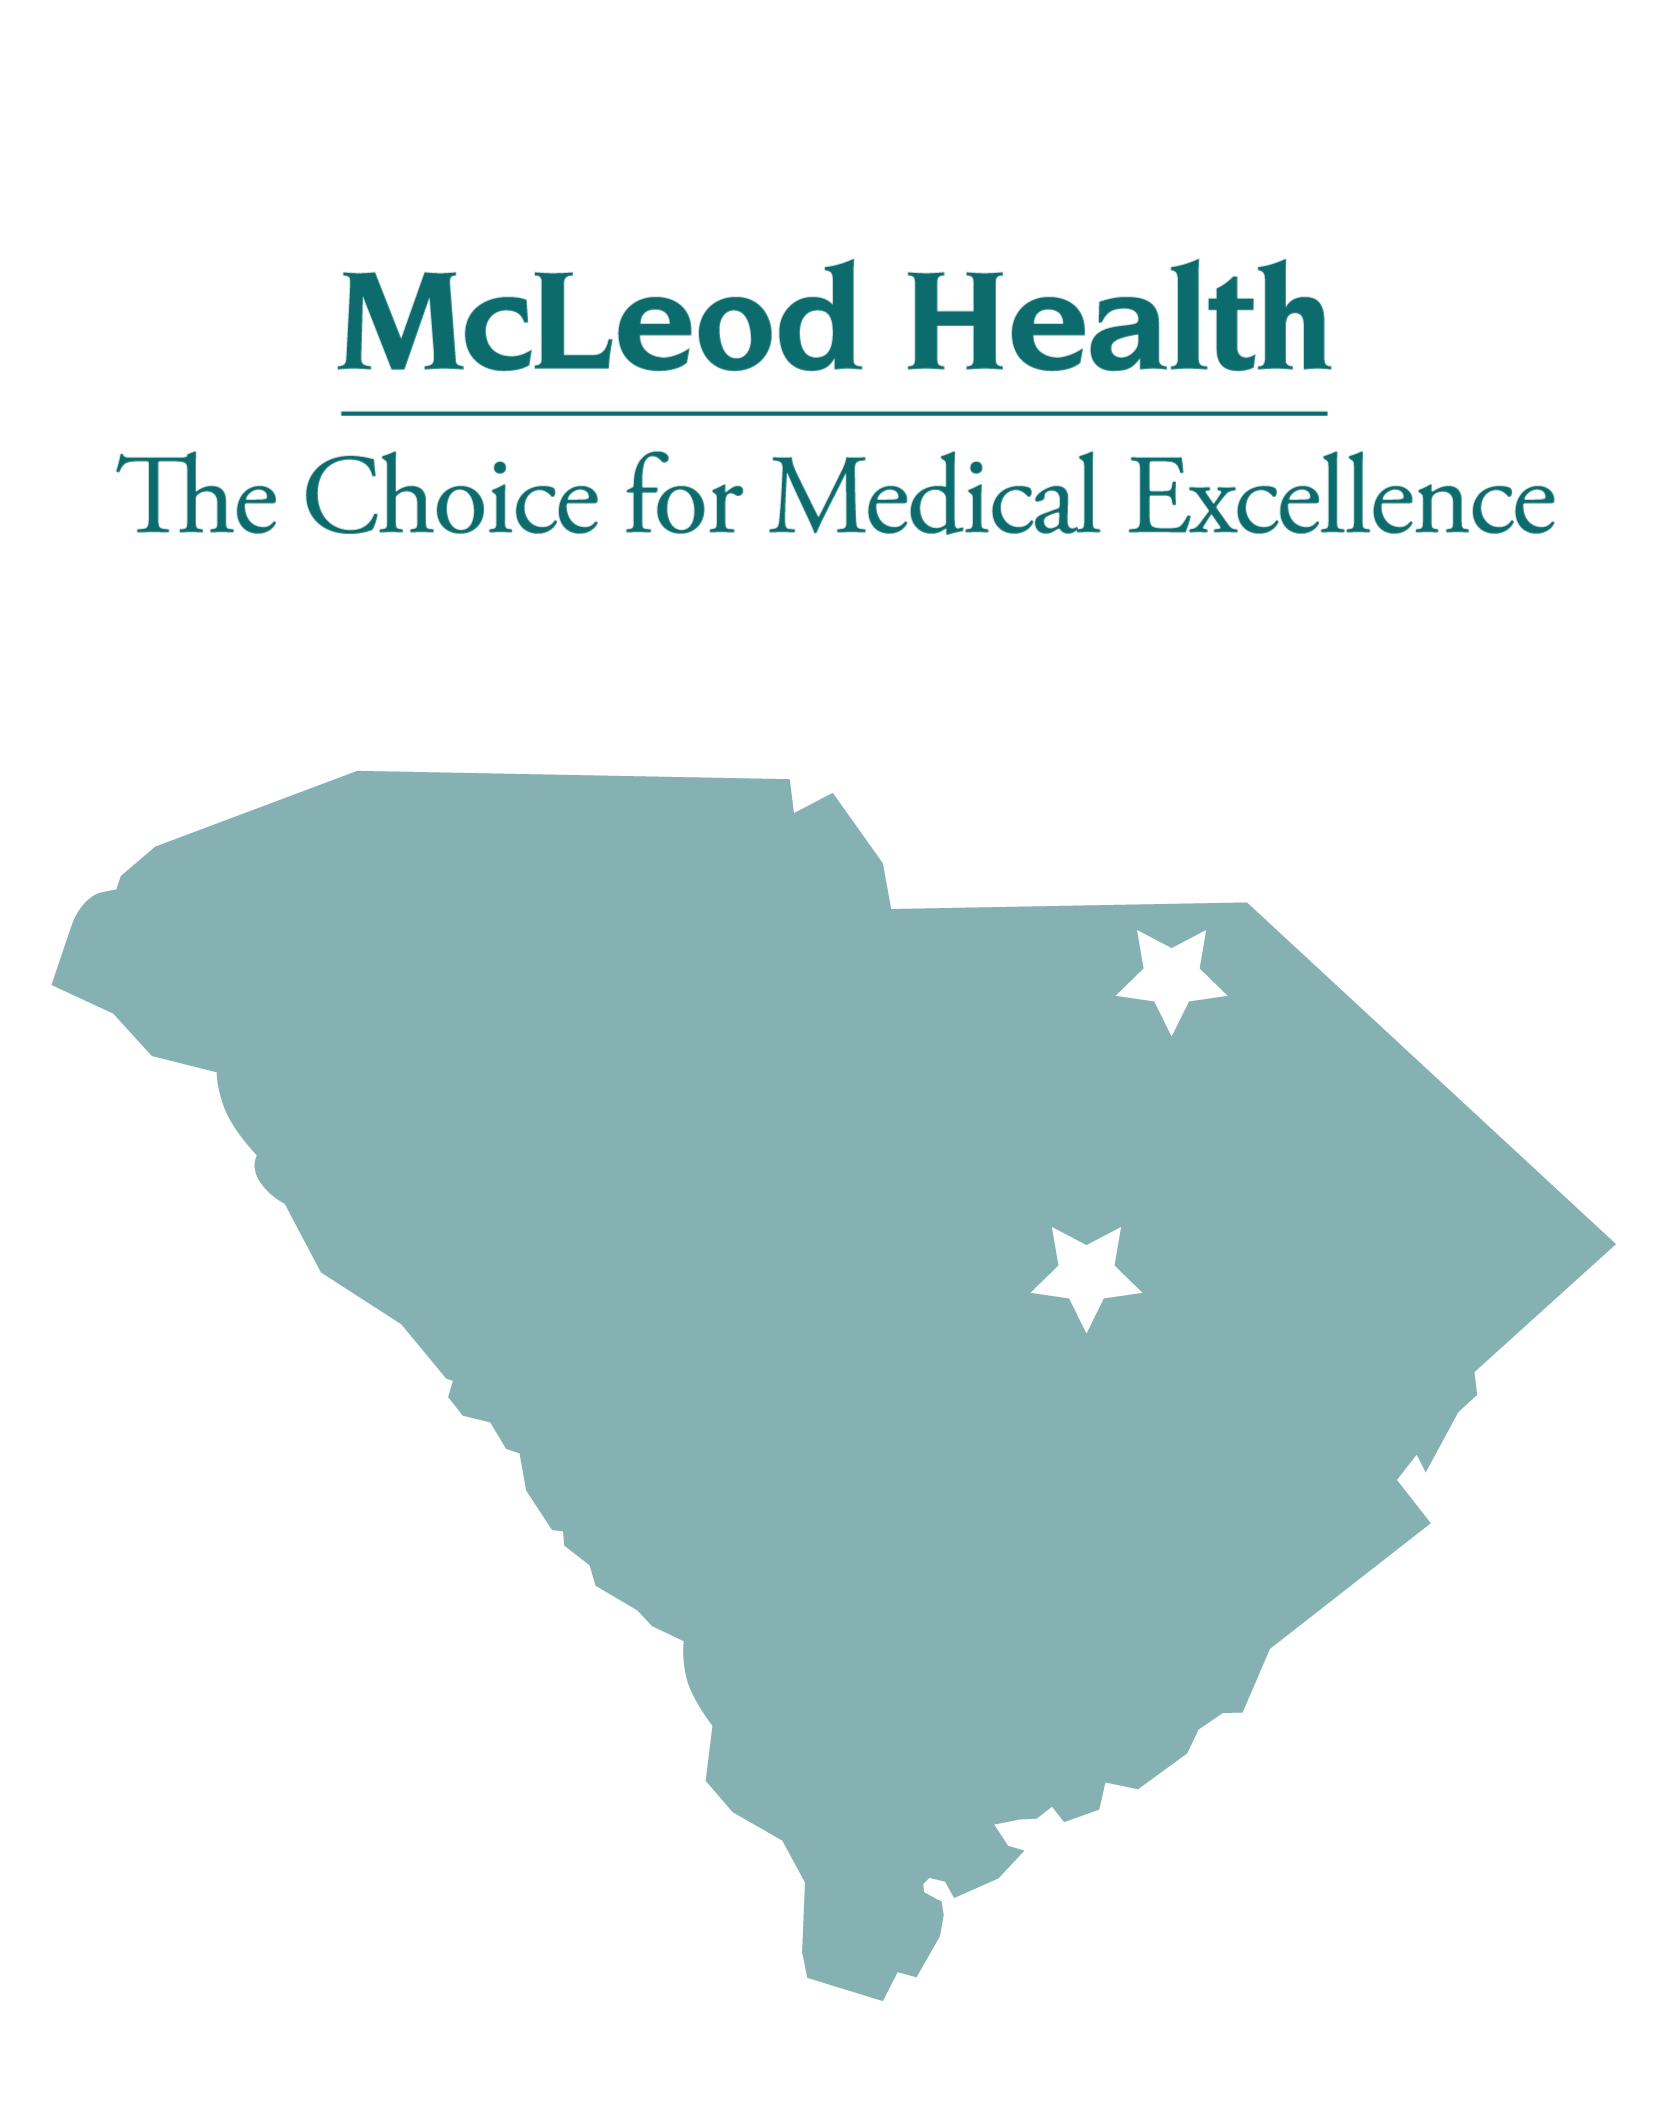 McLeod Health in Cheraw and Clarendon, South Carolina